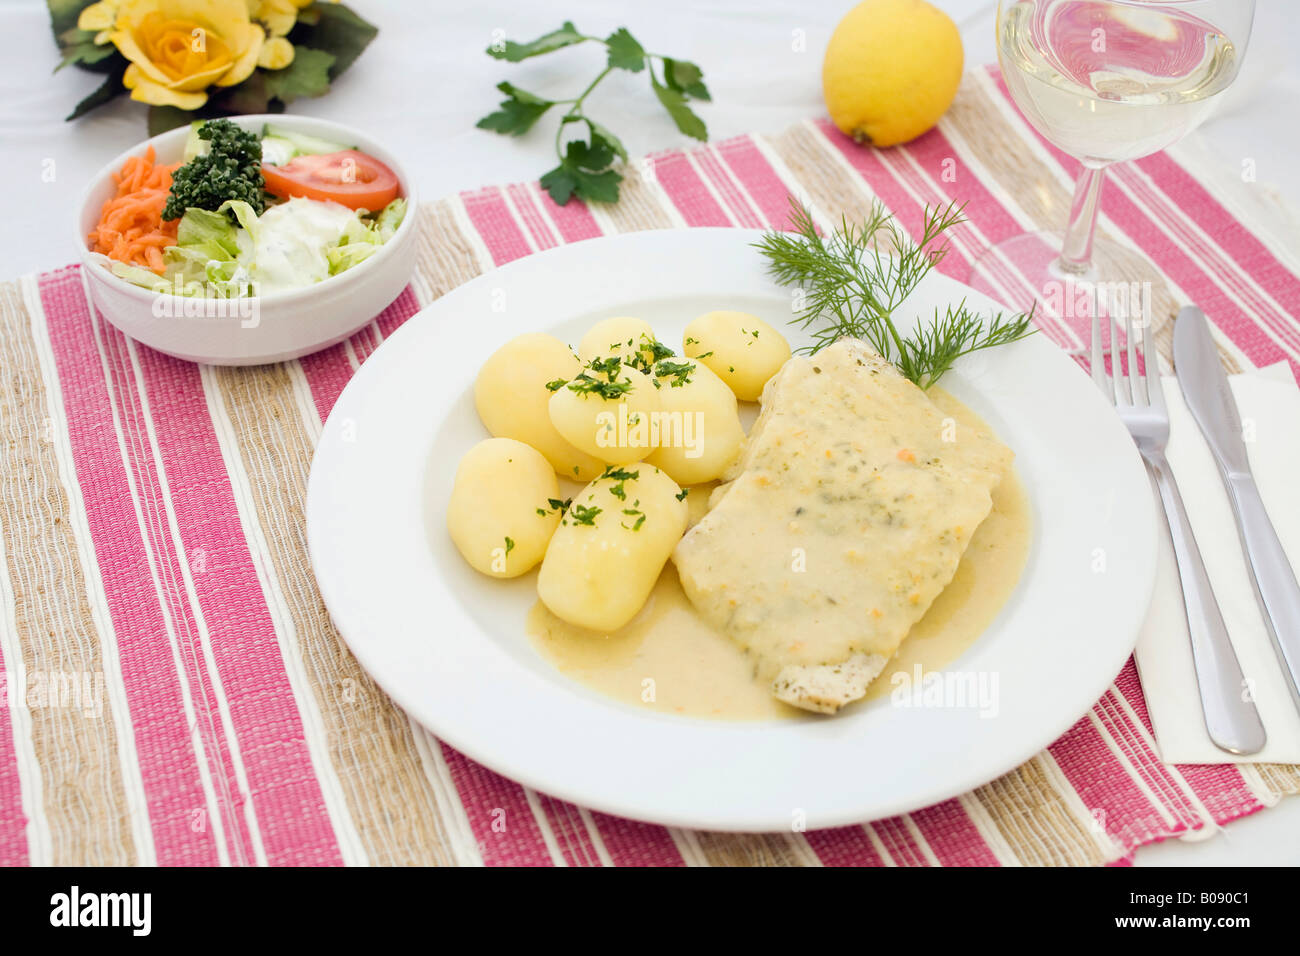 Steamed salmon filet with mustard sauce, boiled potatoes and mixed salad Stock Photo